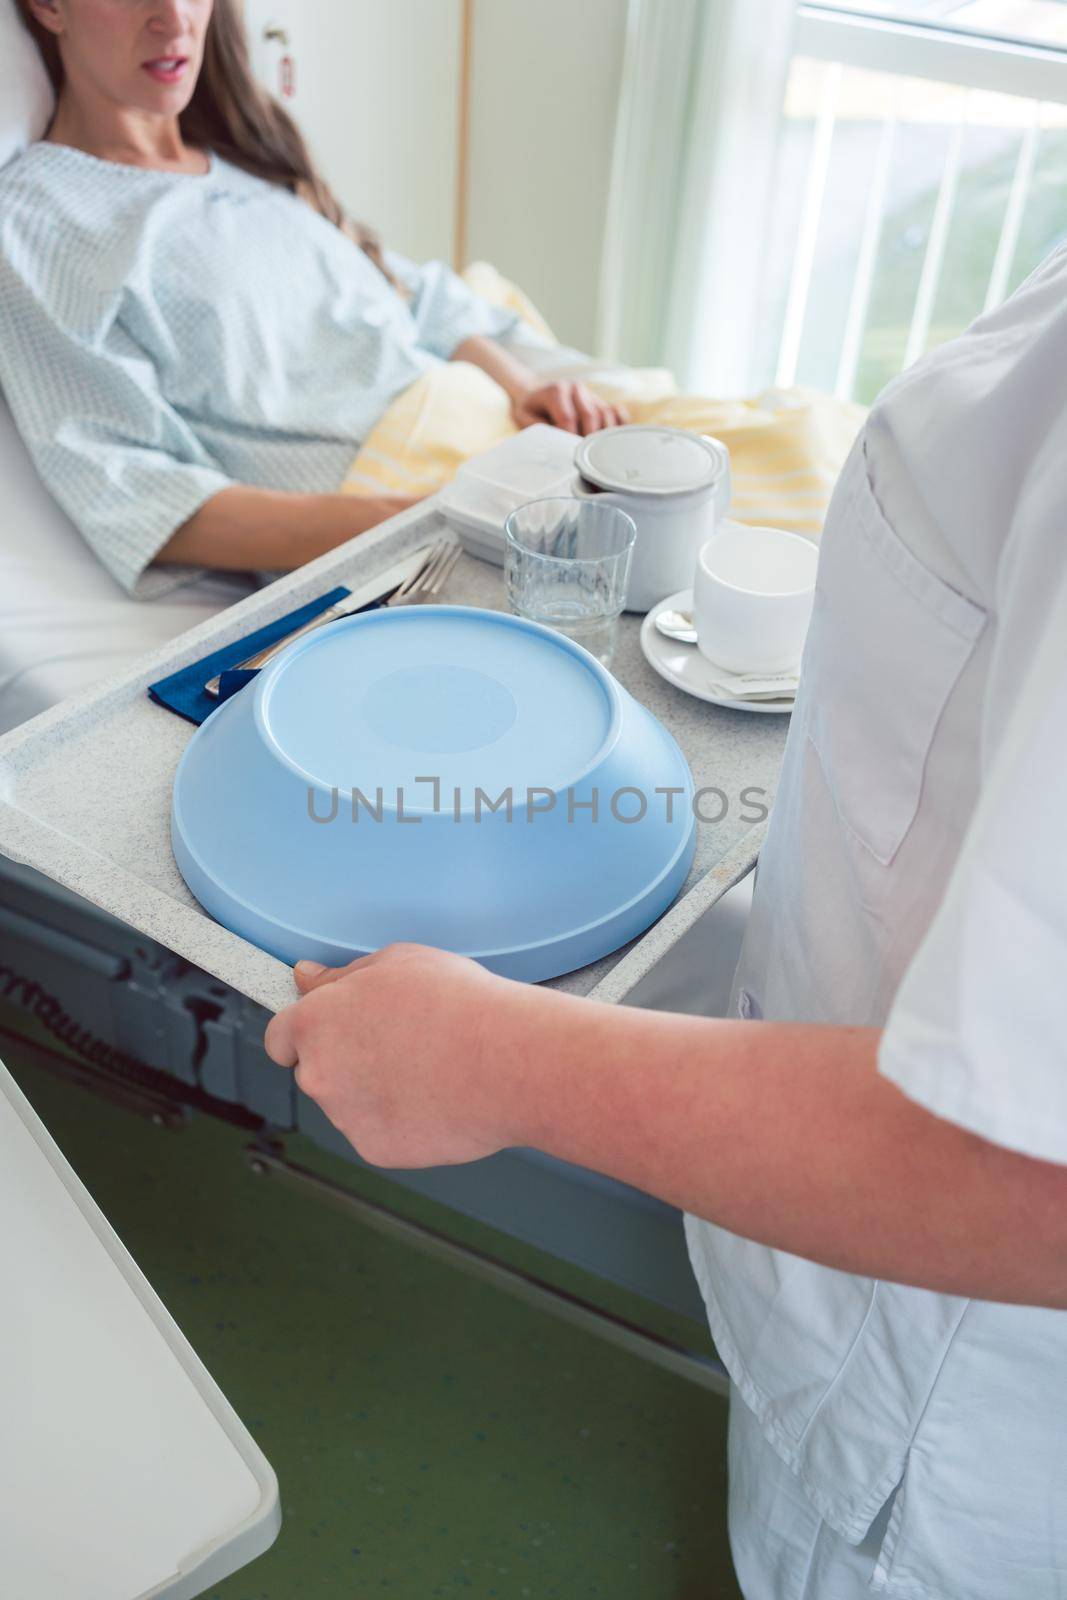 Nurse serving food in the hospital to a patient in bed, top view